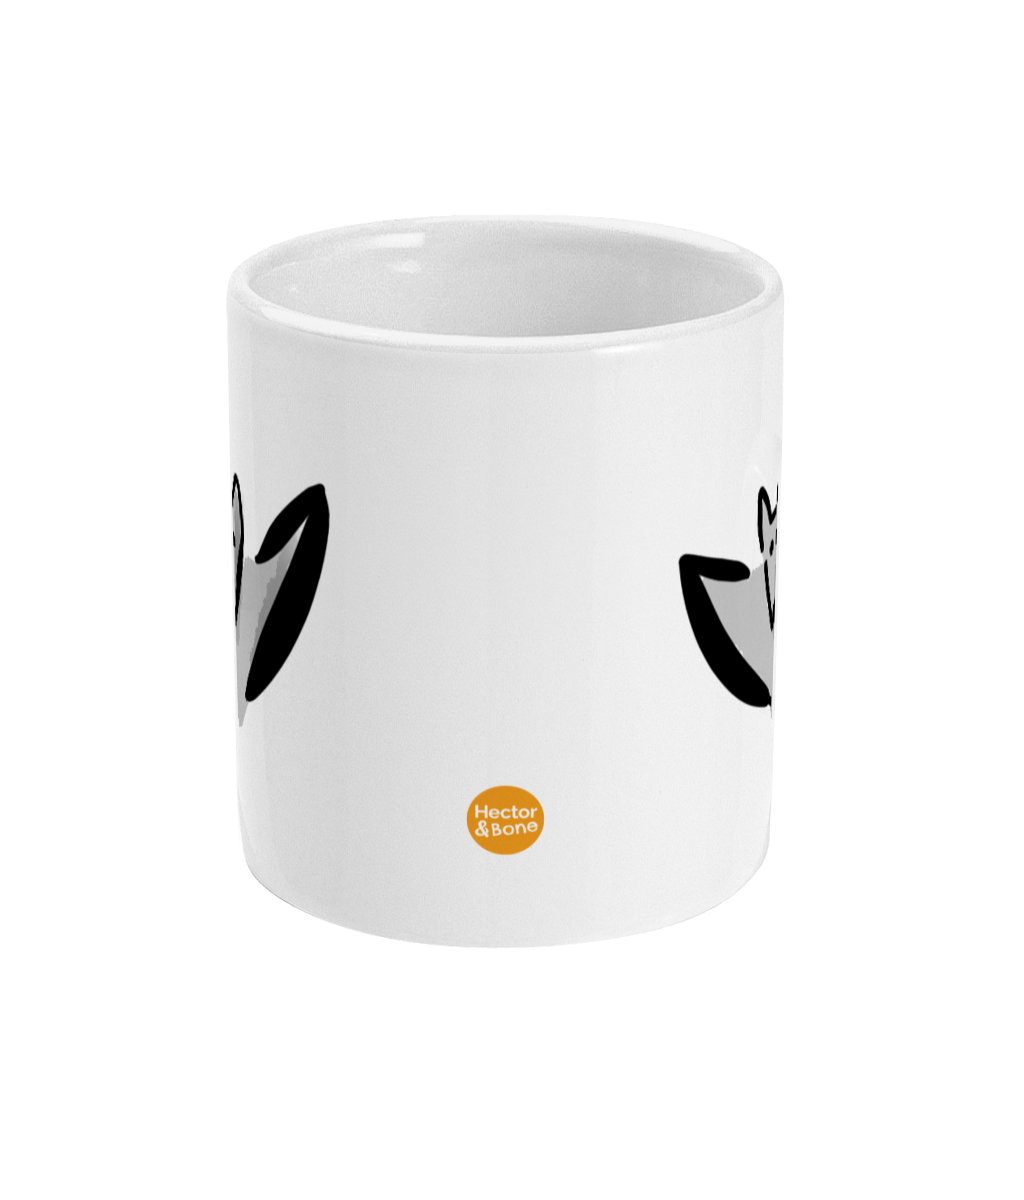 Bertie Bat design coffee mug by Hector and Bone Front View